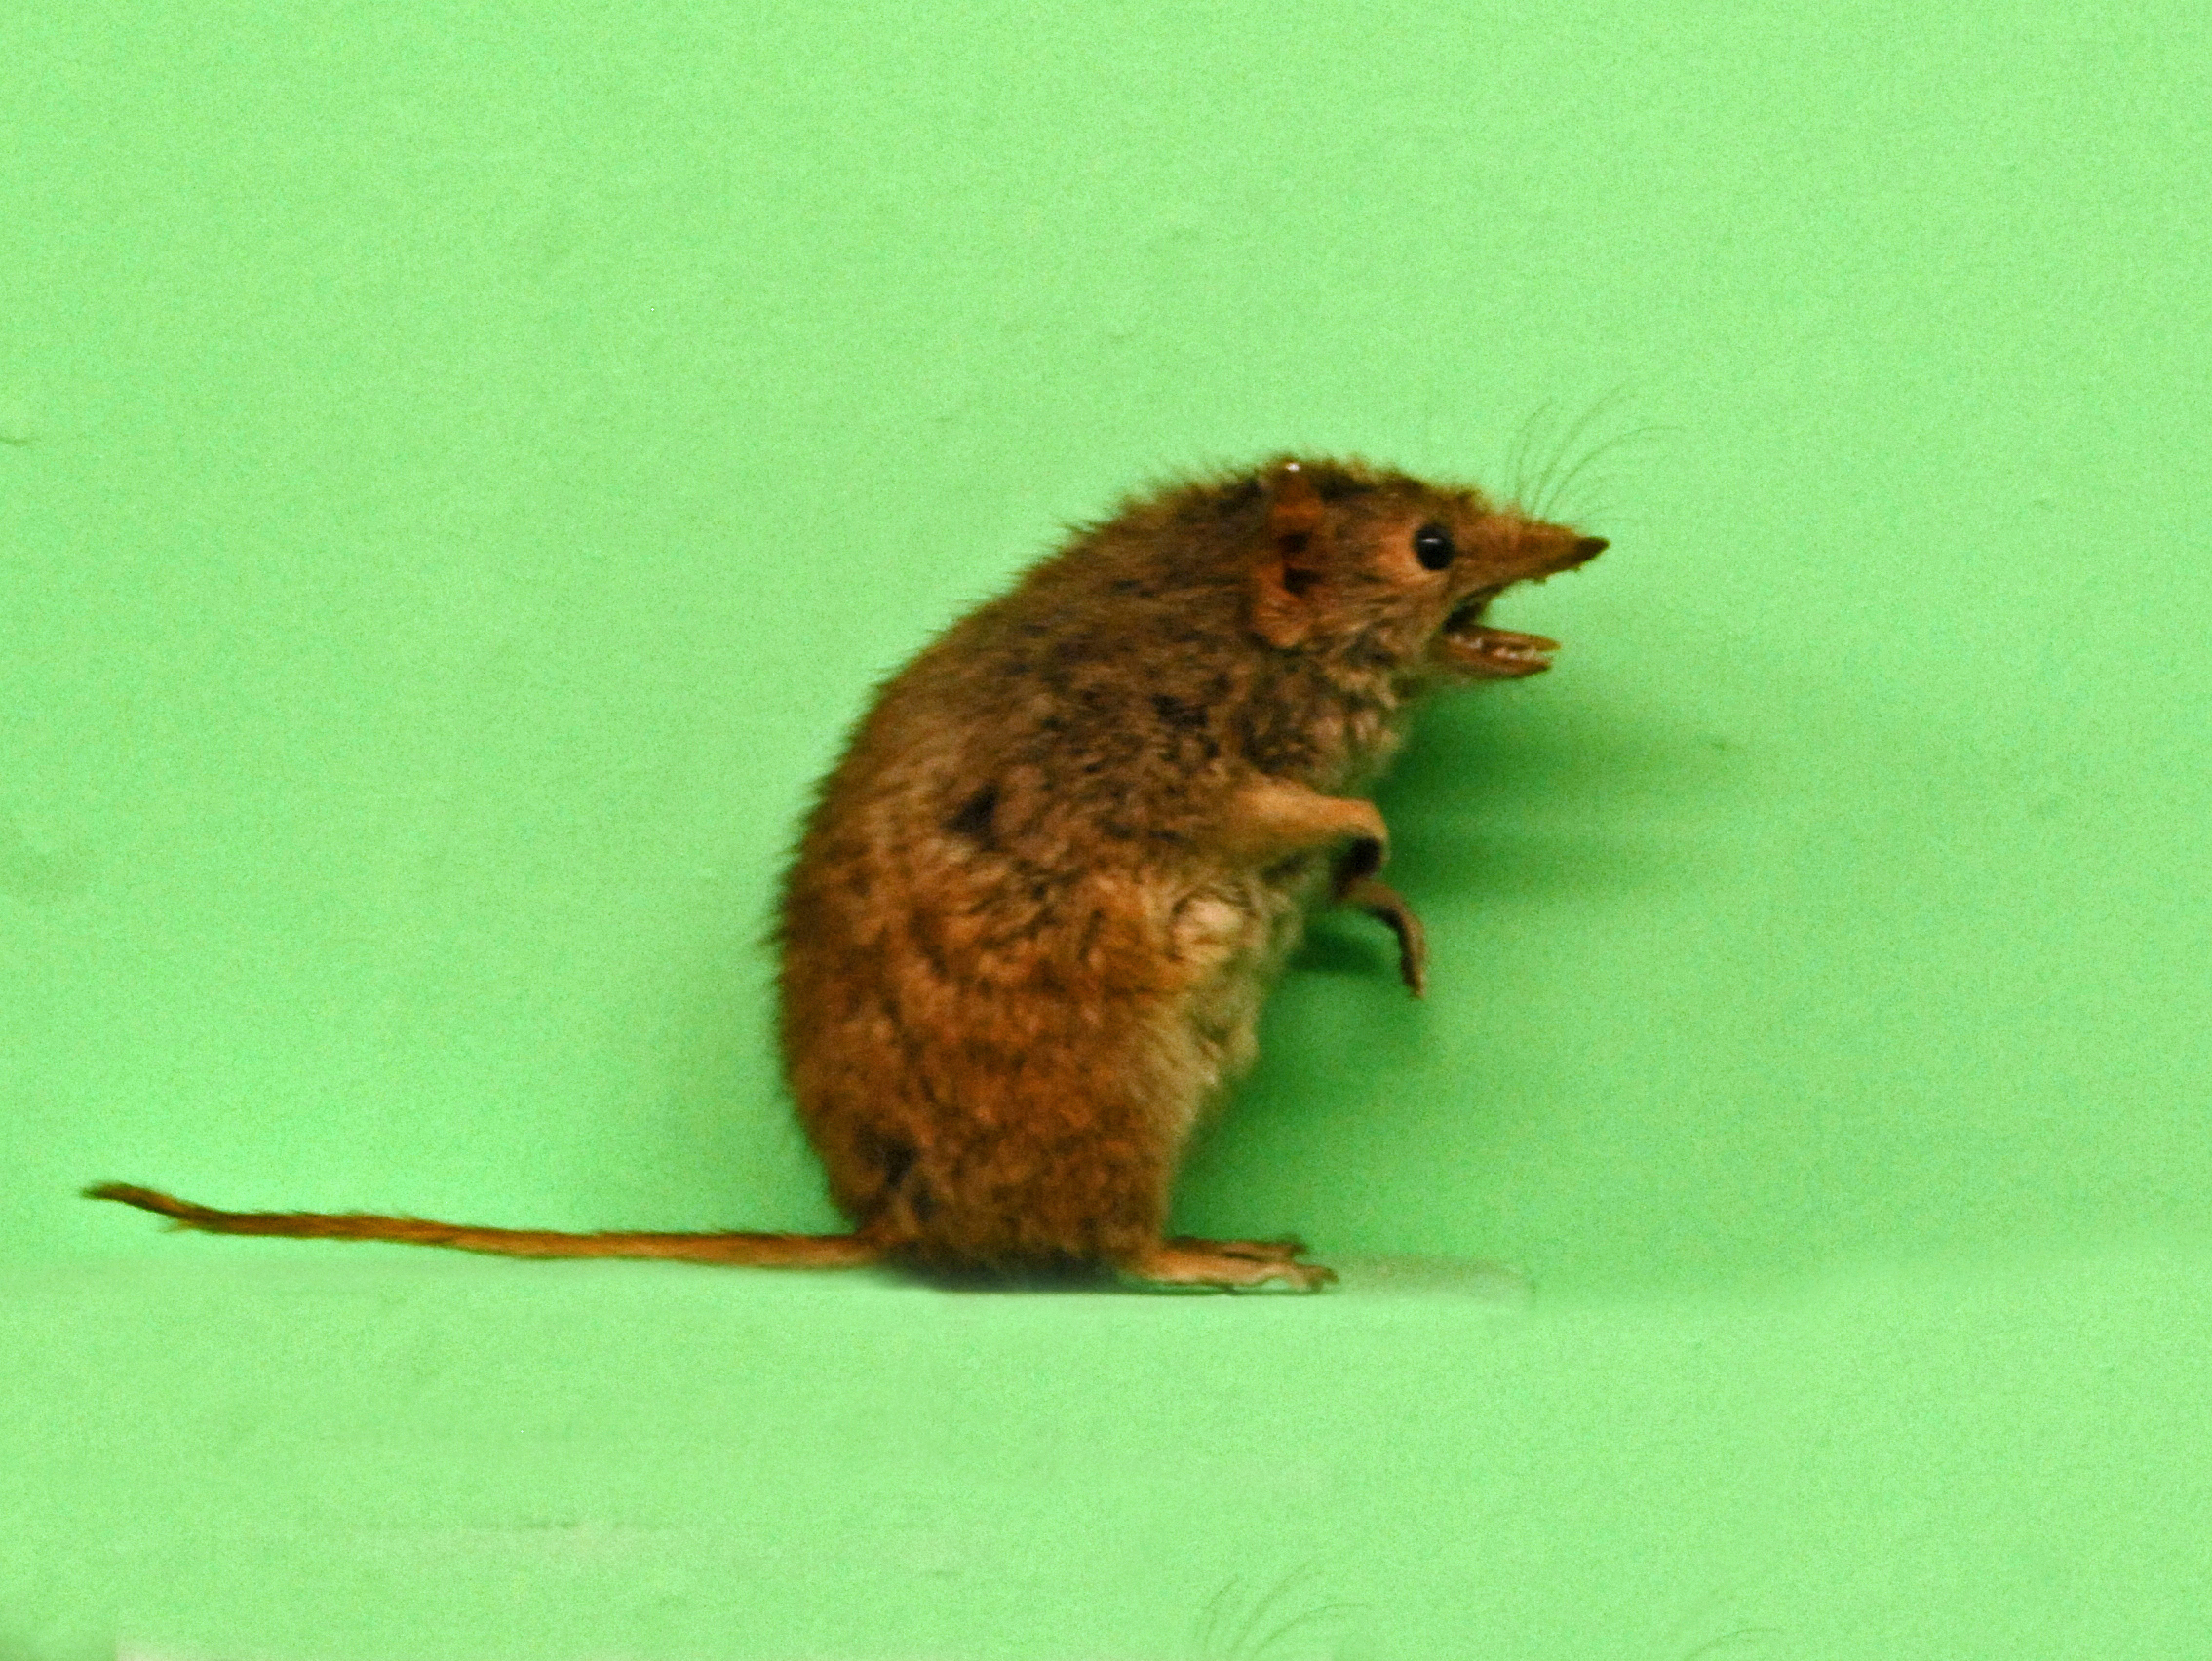 a stuffed specimen of a swamp antechinus, which is a small brown marsupial, against a green background